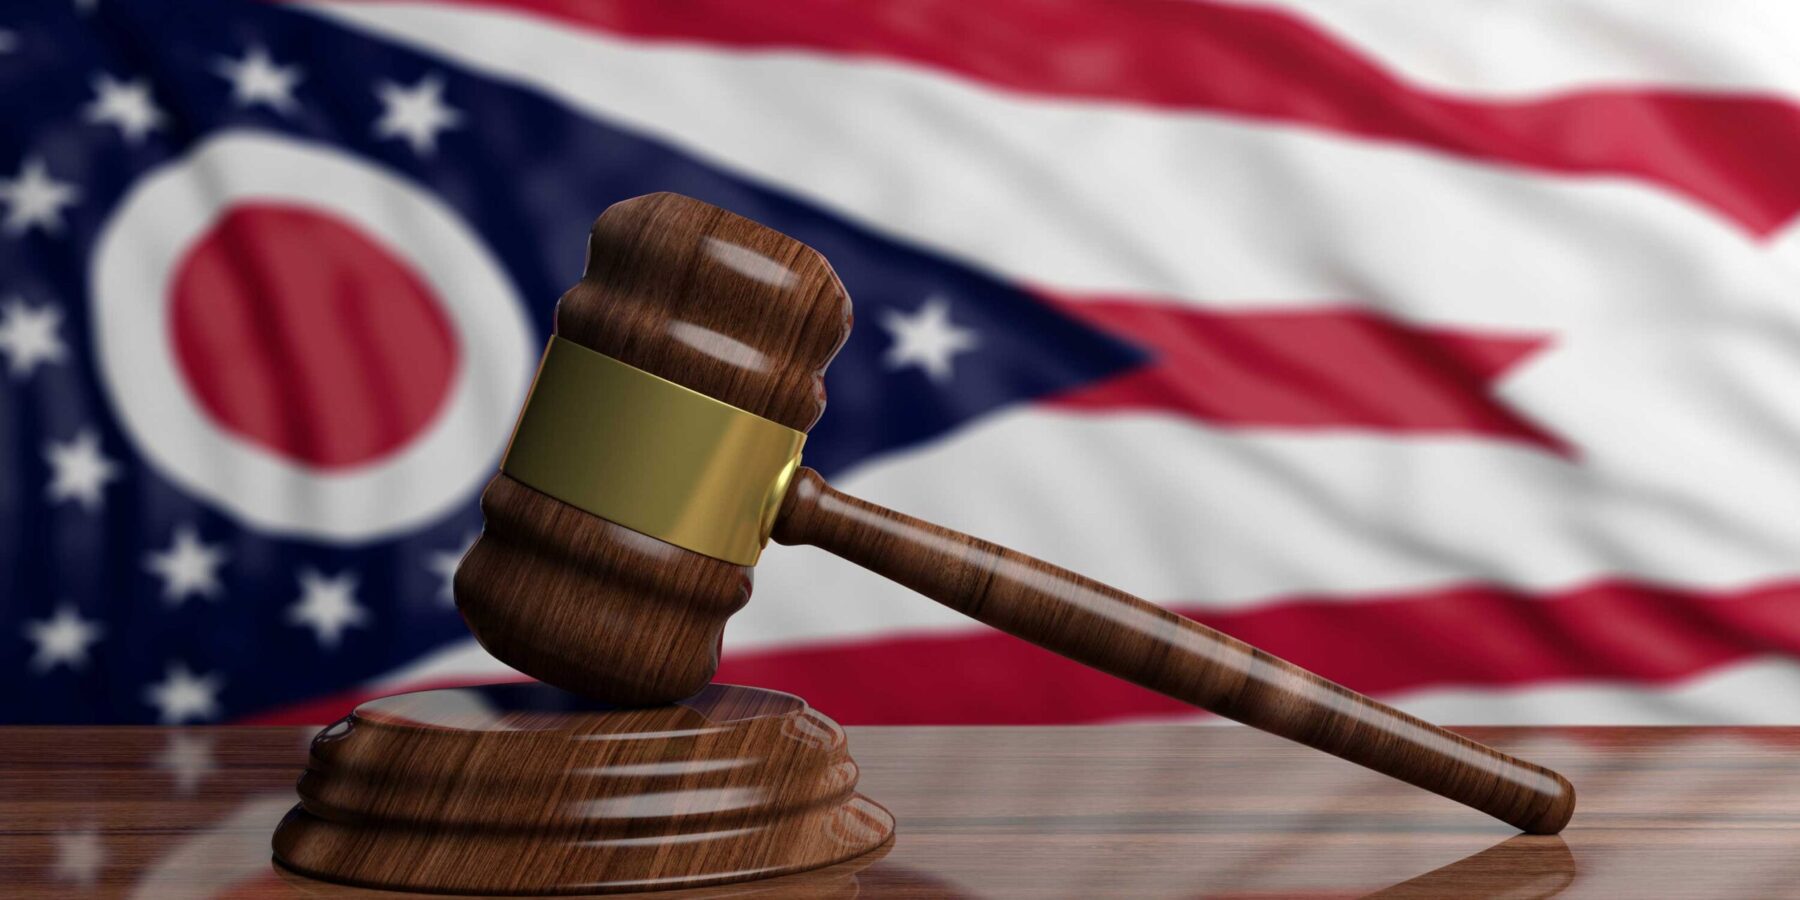 Ohio flag with judge's gavel in front on a wooden table